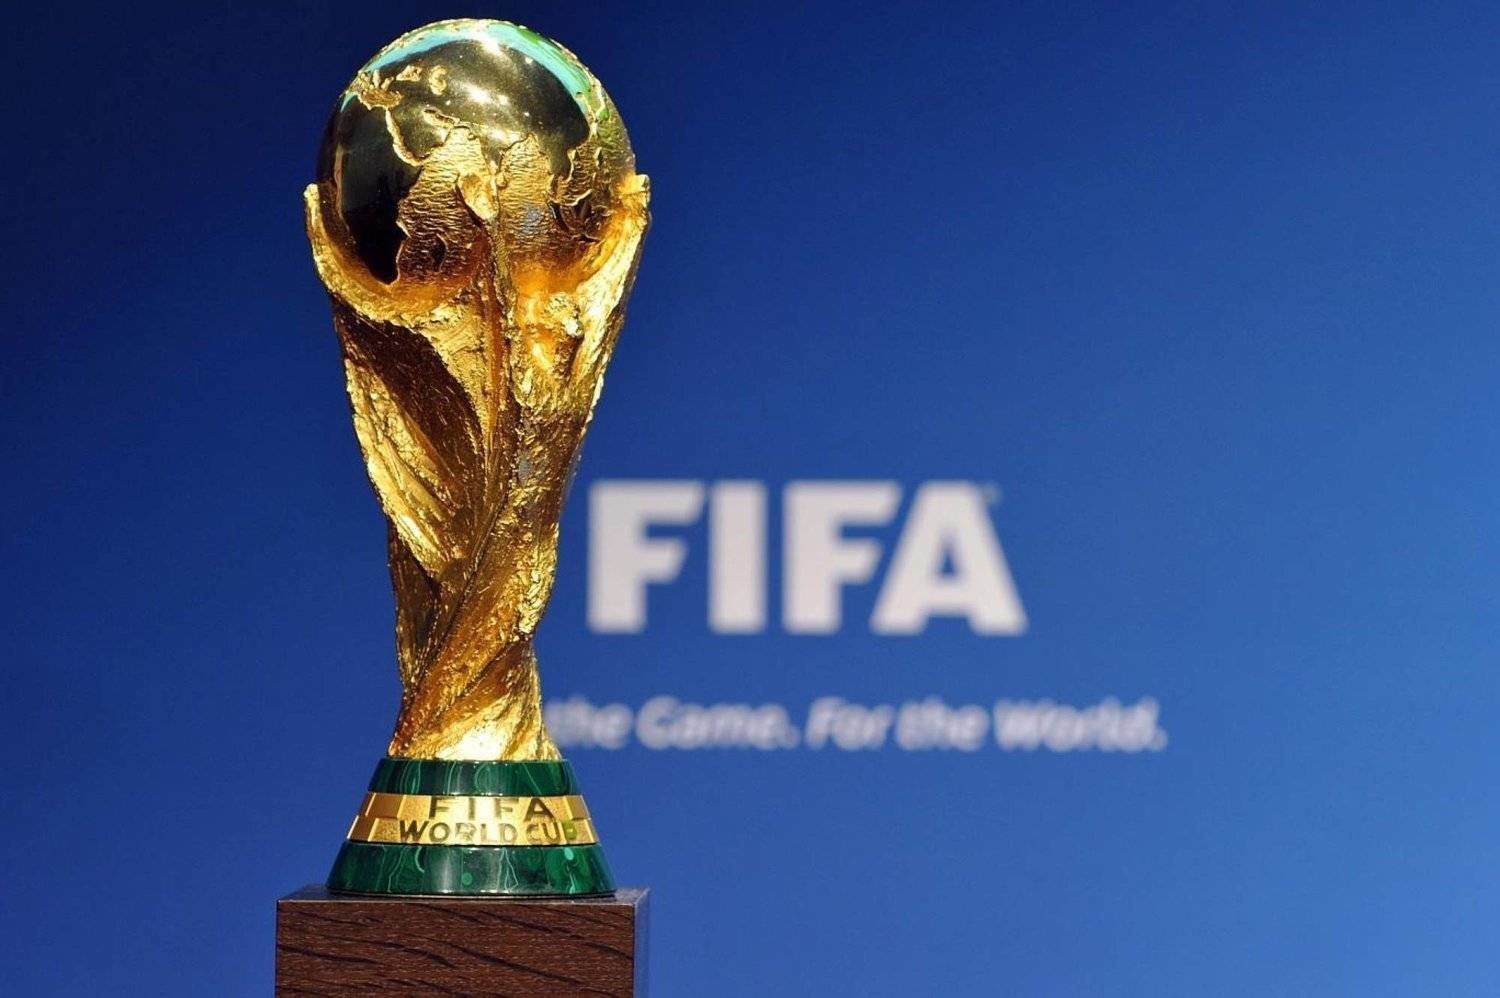 Saudi Arabia clear to host 2034 World Cup  | The Express Tribune